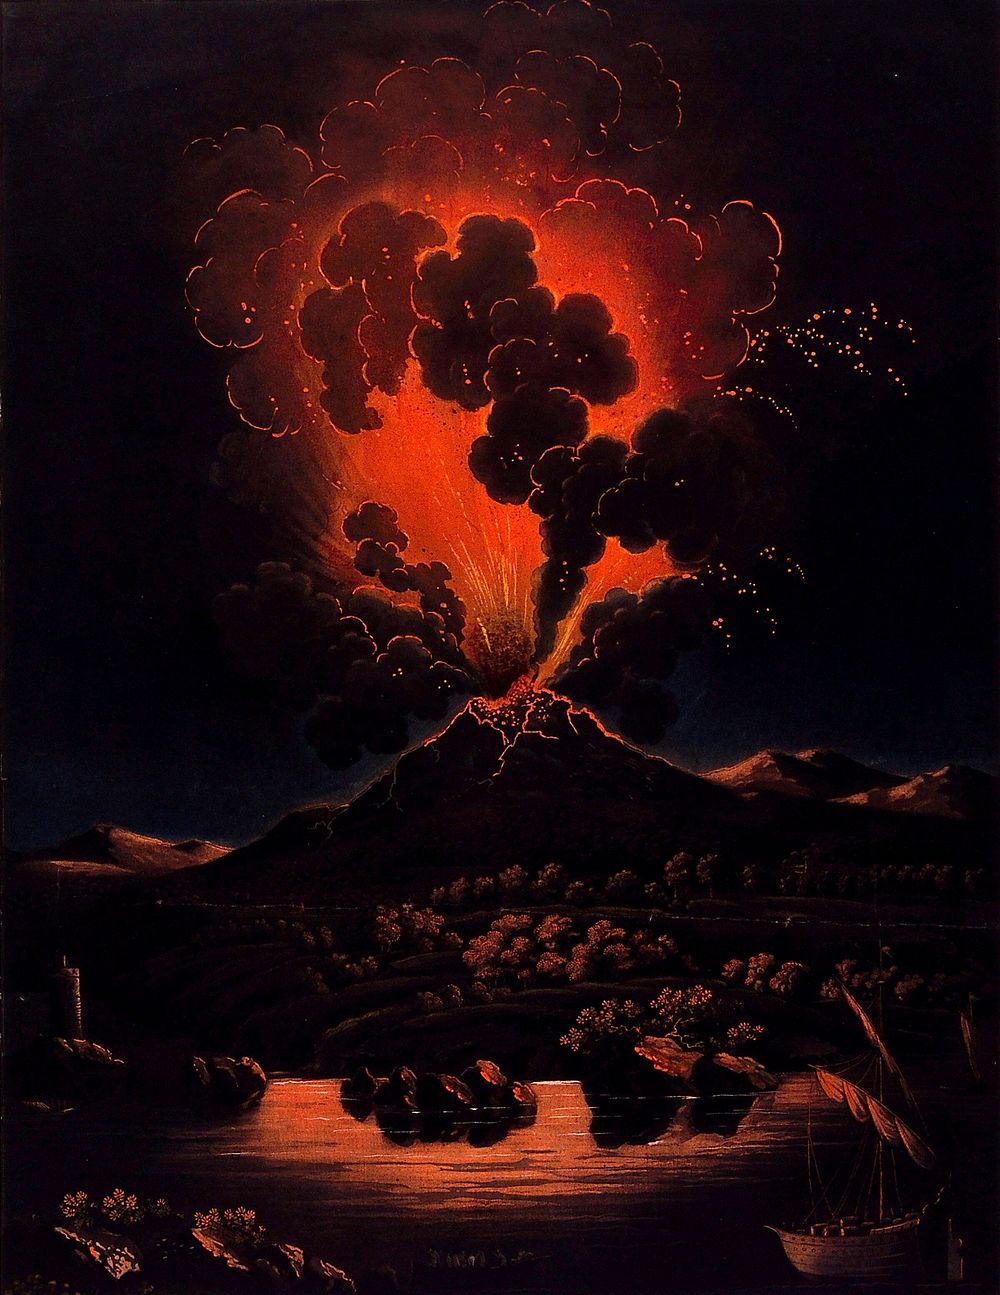 Eruption of Mount Etna at night; people in a boat in the foreground. Aquatint by F. Weber after A. d'Anna, ca. 1820.